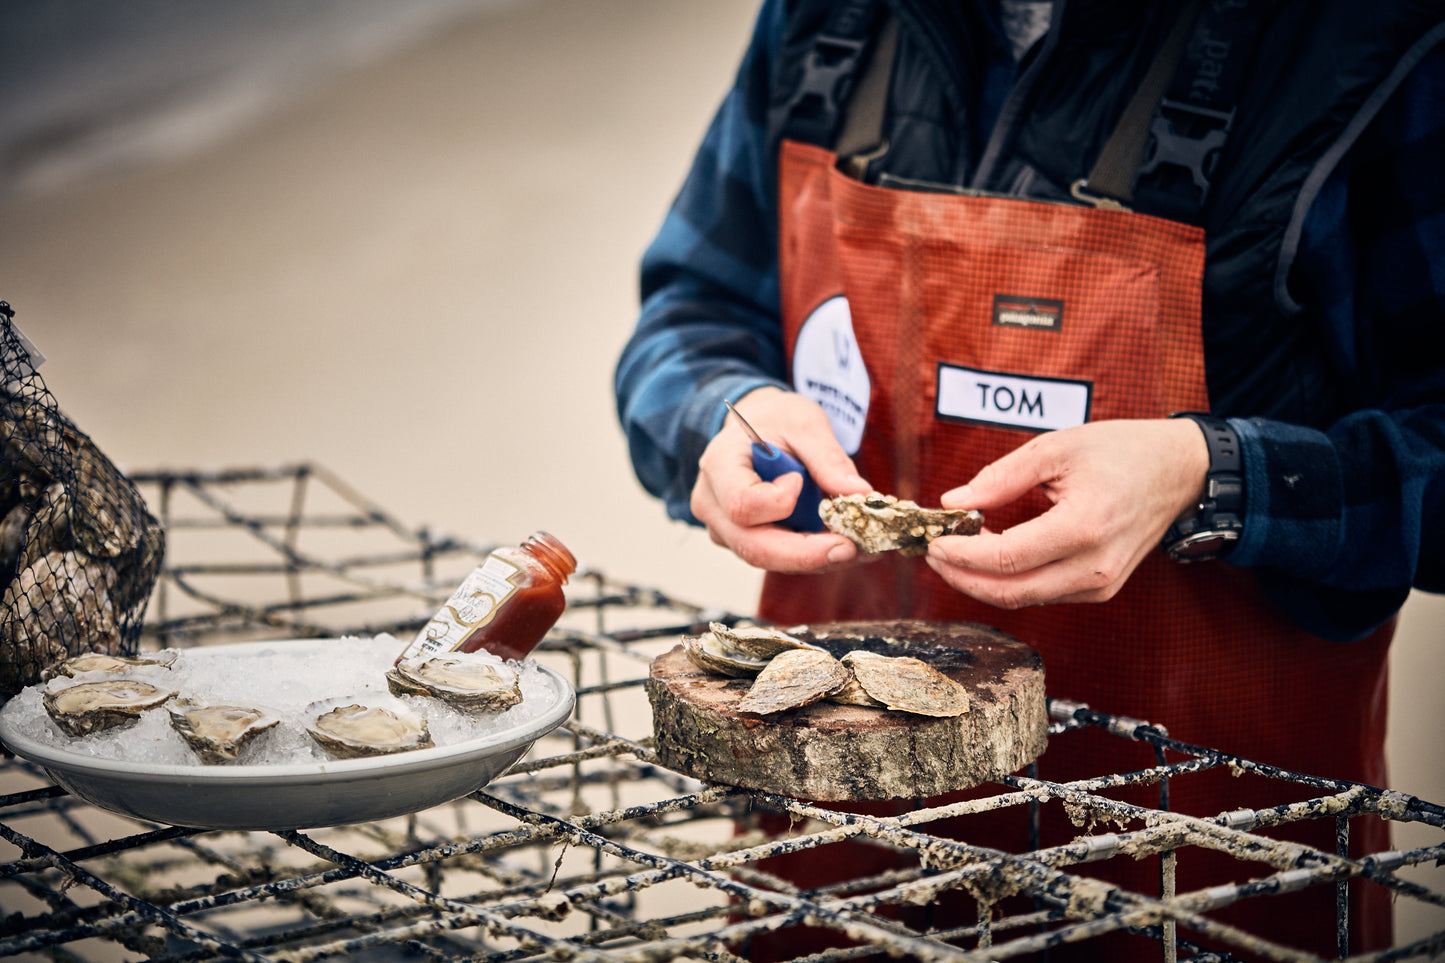 How to shuck and oyster and the history of oyster shuckers